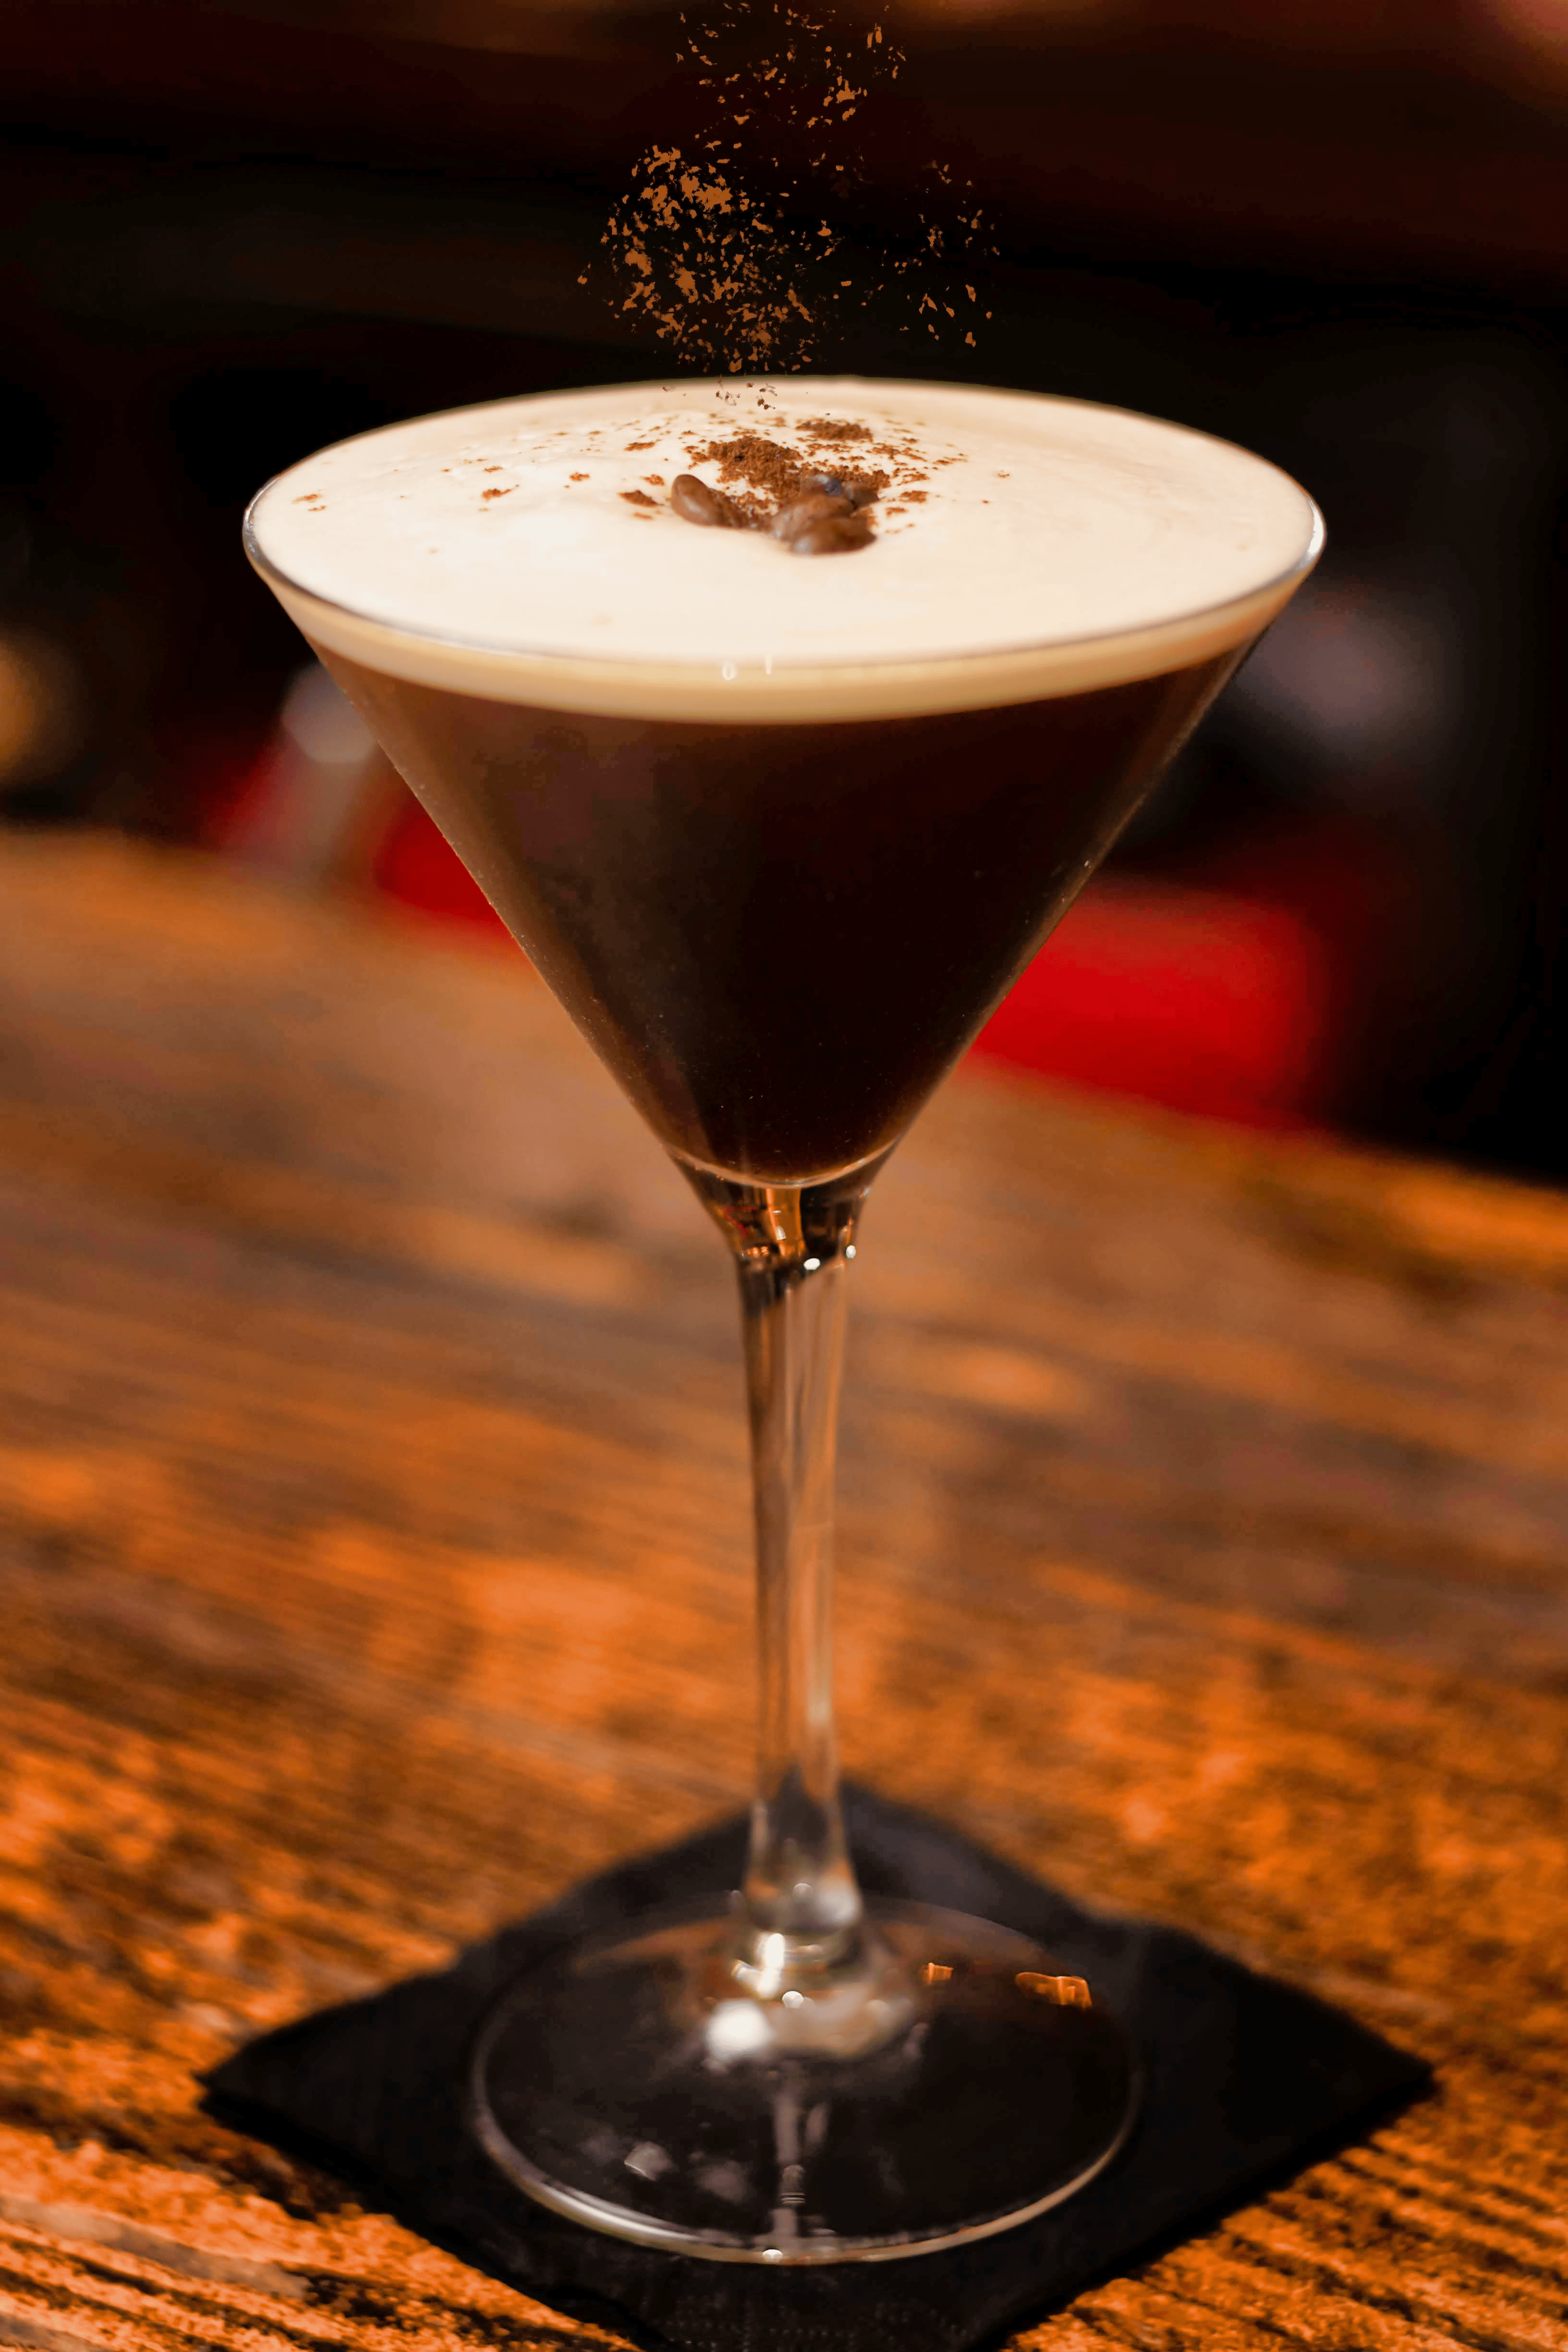 An Espresso Martini glass topped with coffee beans being garnished with chocolate shavings raining down on the creamy surface.